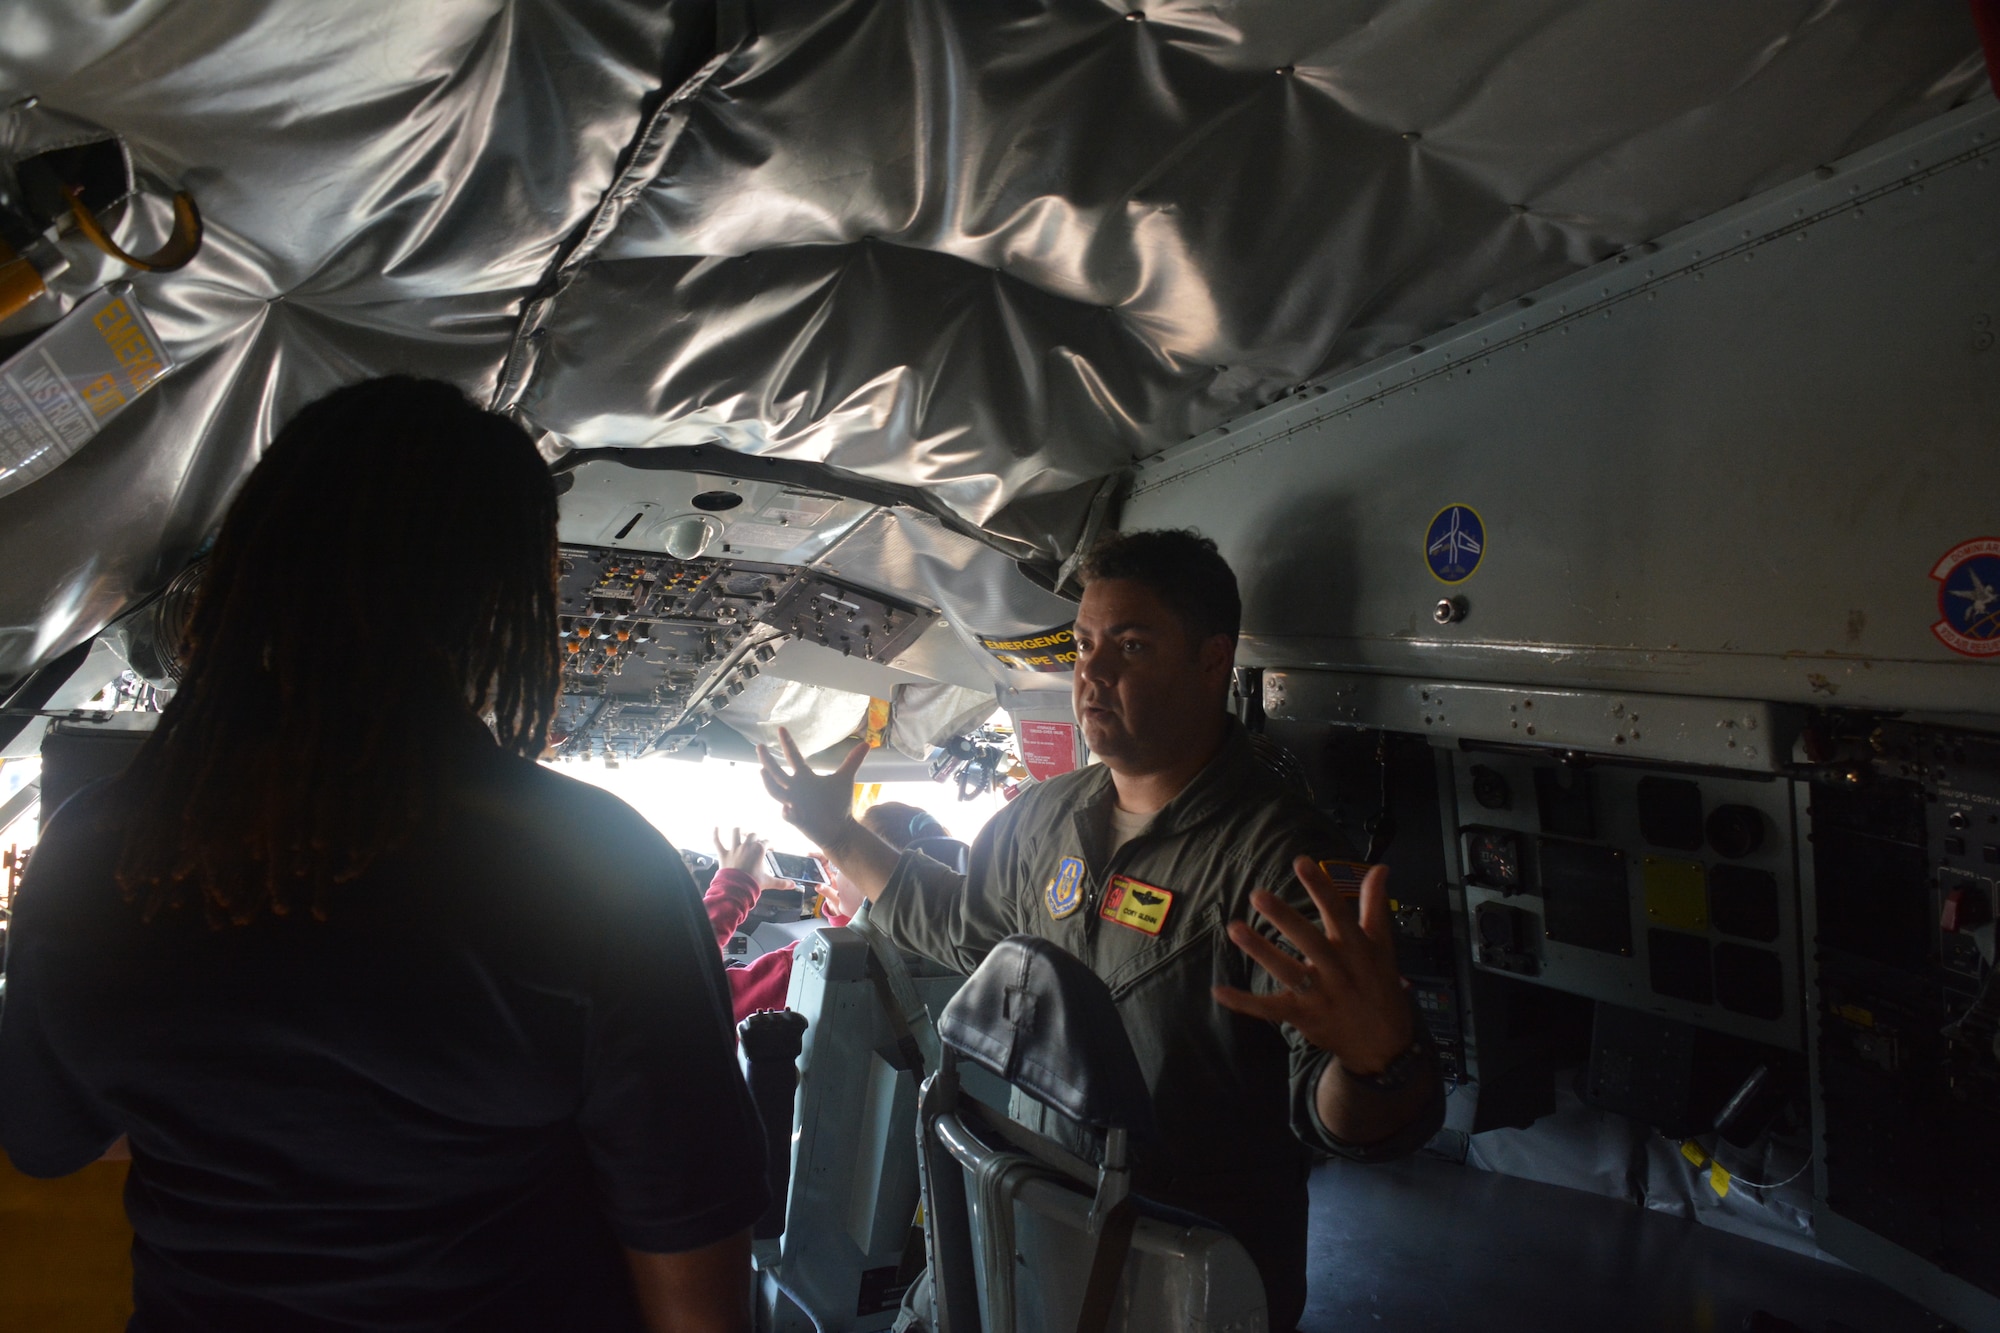 Lt. Col. Cory Glenn, 465th Air Refueling Squadron pilot and ACE Academy coordinator briefs students on the capabilities of an Air Force Reserve KC-135R Stratotanker June 5, 2019. Middle school kids experienced a weeklong immersion in a variety of aviation and aerospace professions. The students received hands-on briefings and tours from pilots operating the KC-135R Stratotanker, F-16 Fighting Falcon and the T-6 Texan II aircraft. (U.S. Air Force Photo by Maj. Jon Quinlan)